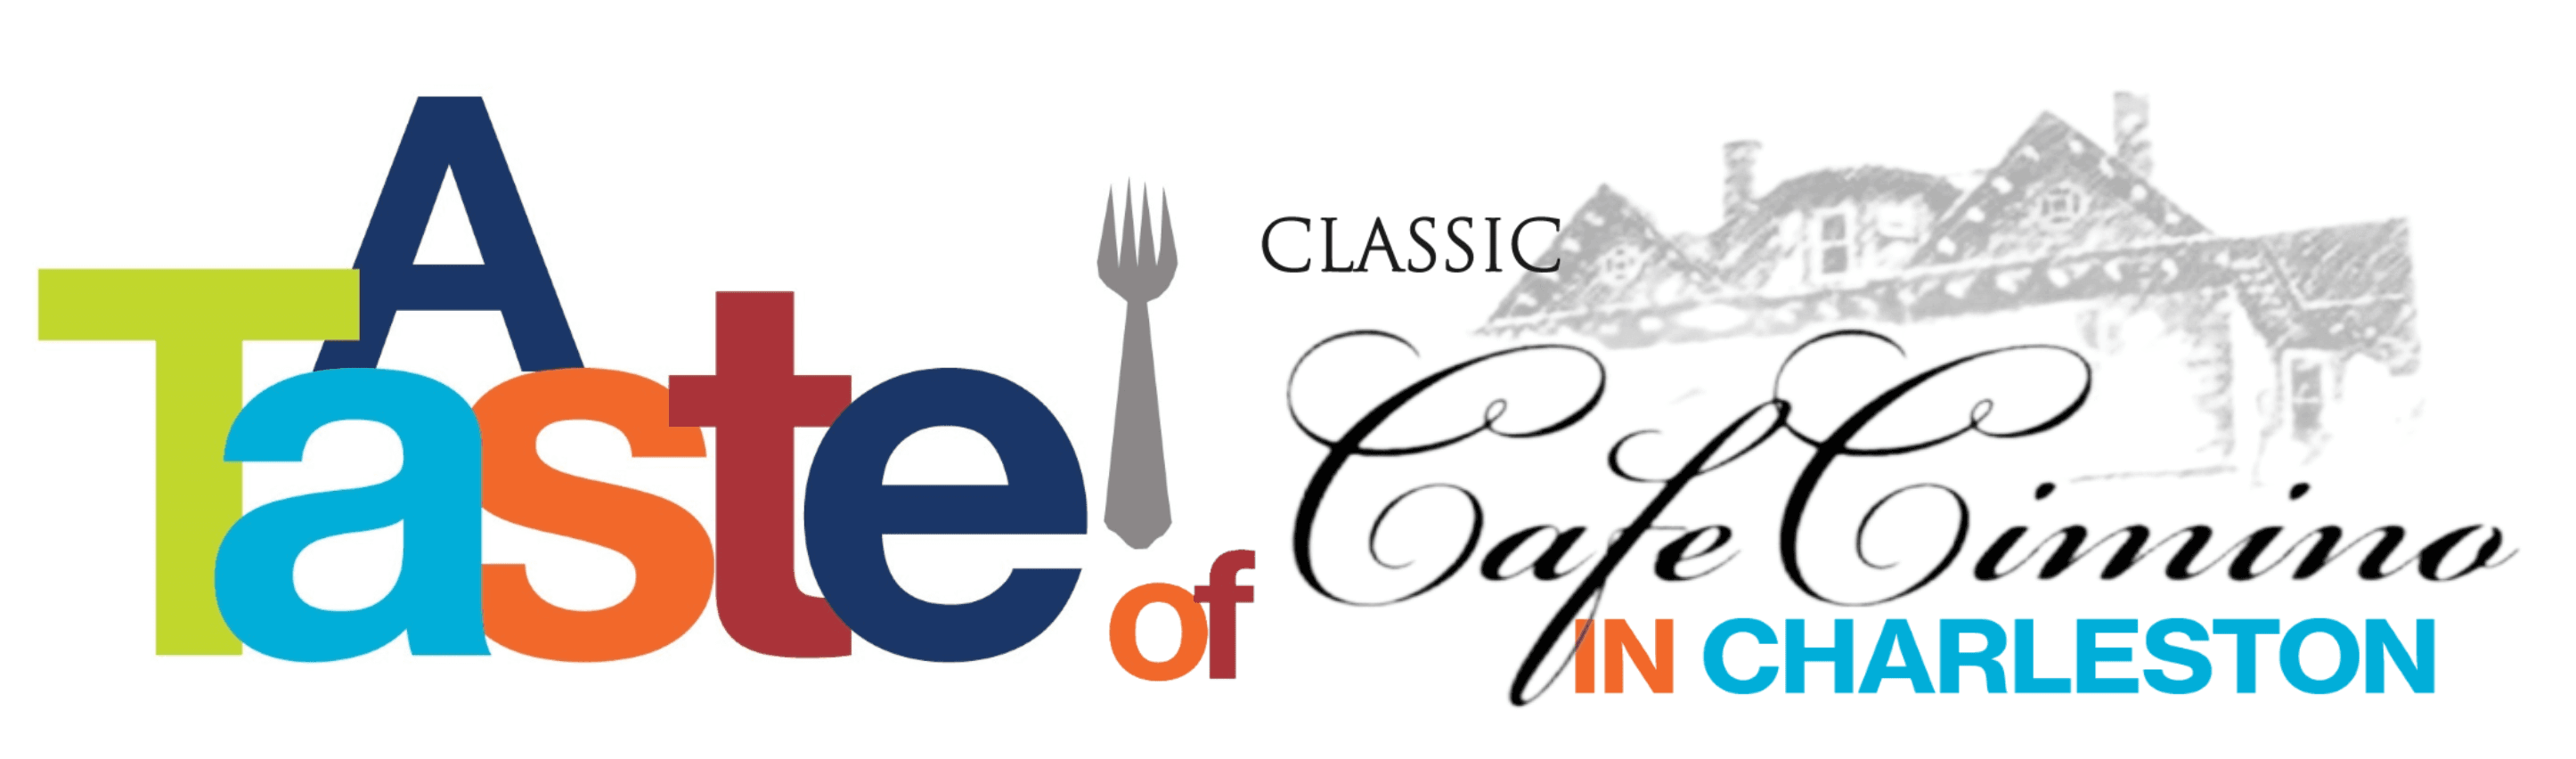 "A Taste of ... in Charleston" is a fundraiser hosted by Habitat for Humanity of Kanawha & Putnam. Habitat brings a top-rated West Virginian restaurant to Charleston, showcasing the chefs top dishes for you to enjoy.